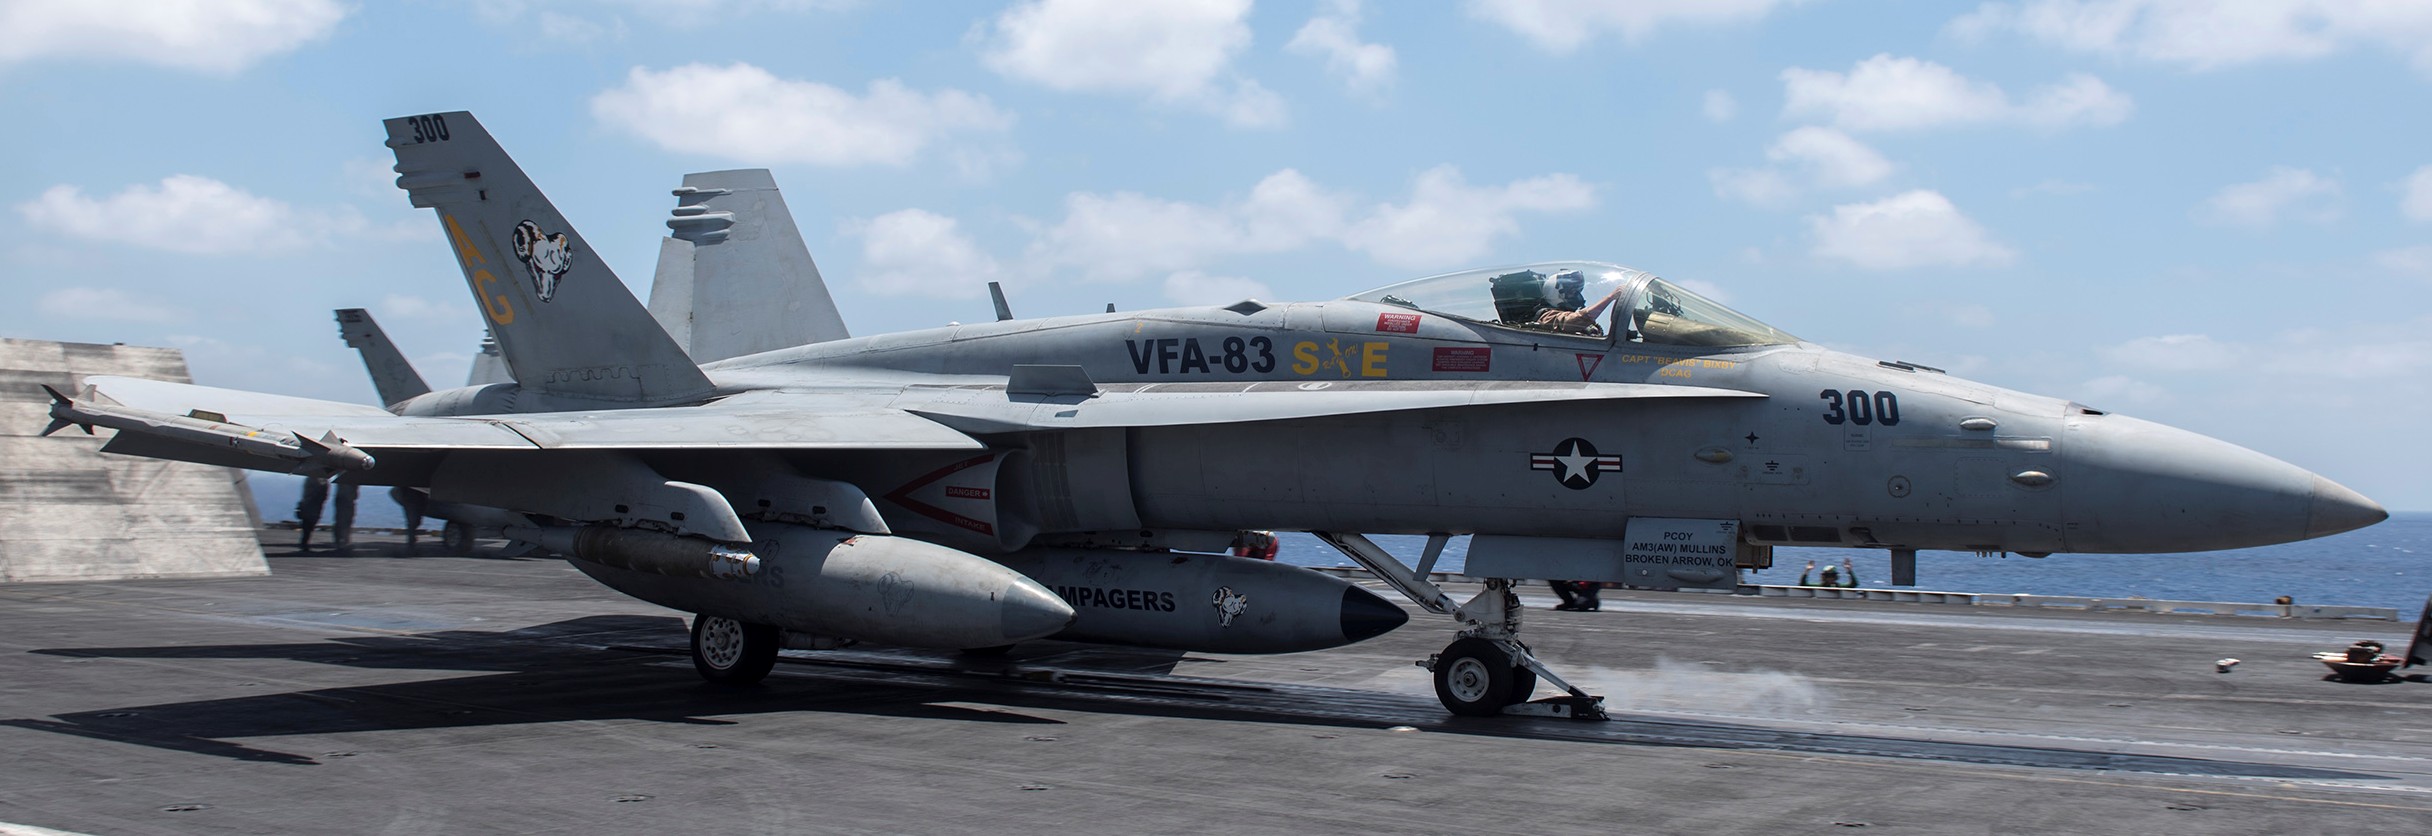 vfa-83 rampagers strike fighter squadron f/a-18c hornet cvw-7 uss harry s. truman cvn-75 50p